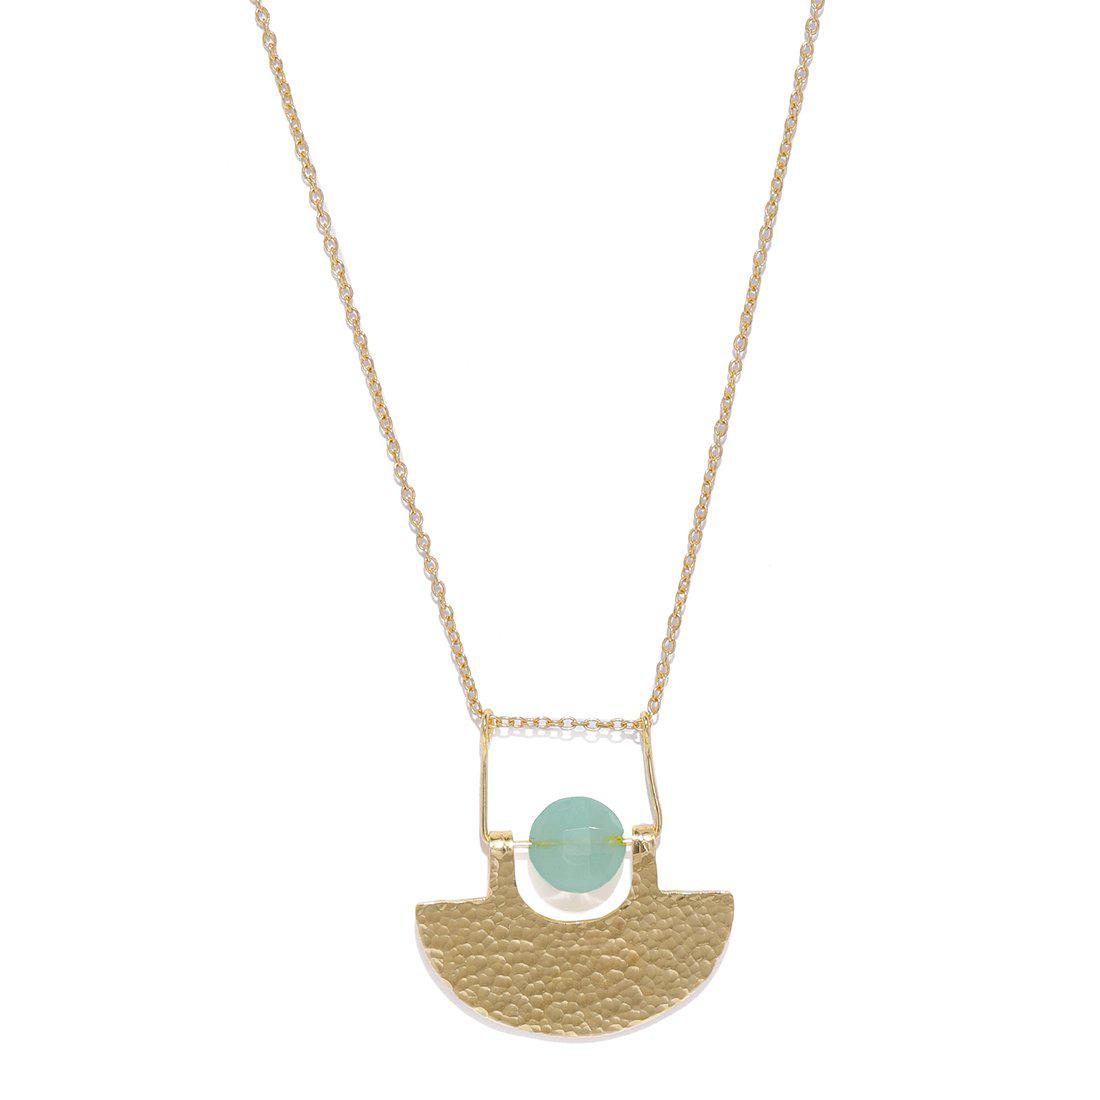 HANDCRAFTED BRASS HAMMERED GEOMETRIC PENDANT NECKLACE